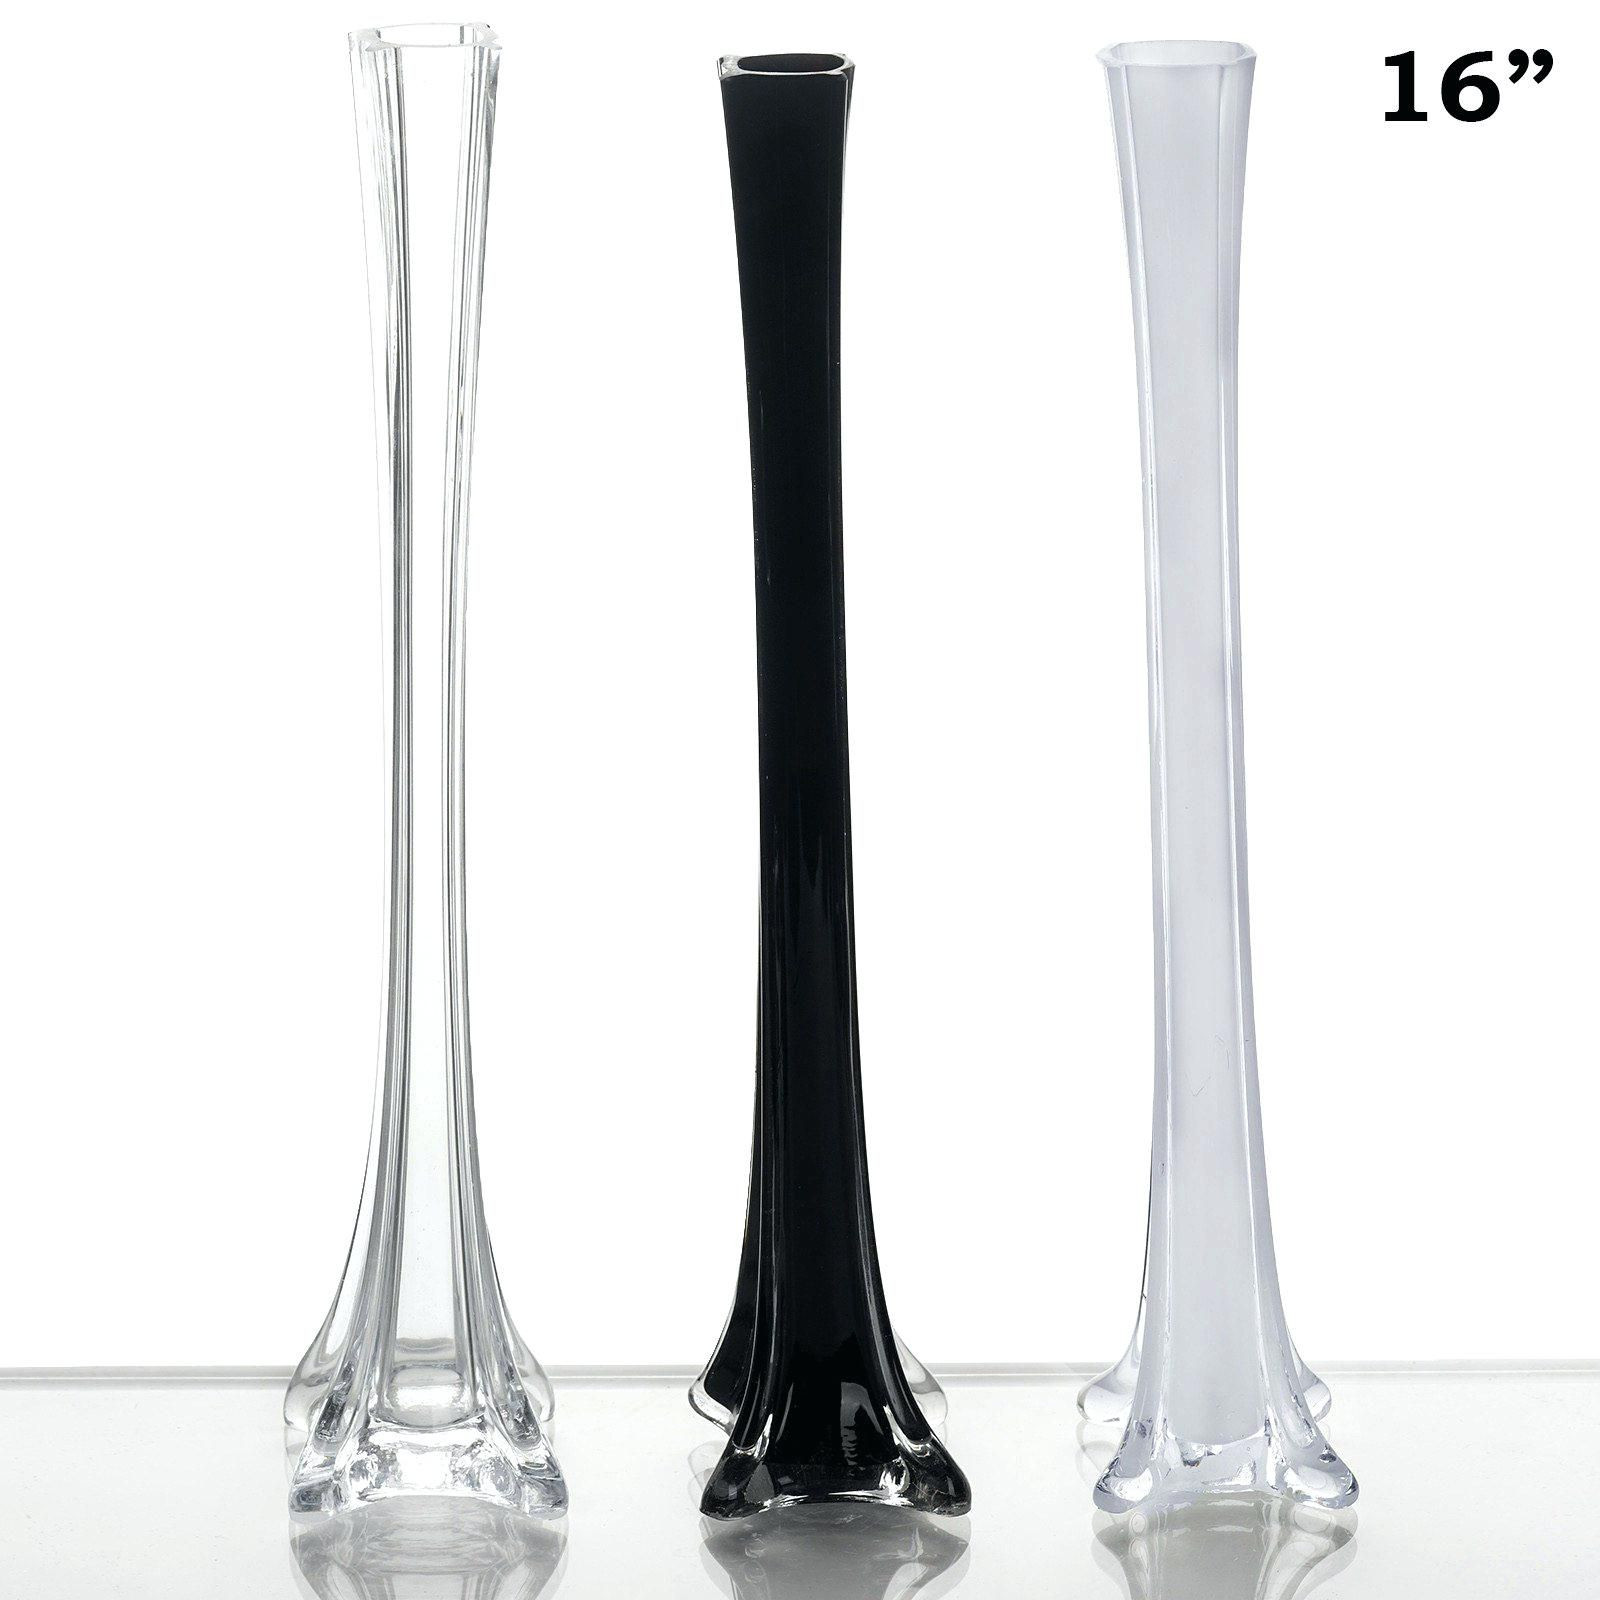 11 attractive 24 Glass Vases wholesale 2024 free download 24 glass vases wholesale of 40 glass vases bulk the weekly world with gallery plastic eiffel tower vases wholesale drawings art gallery